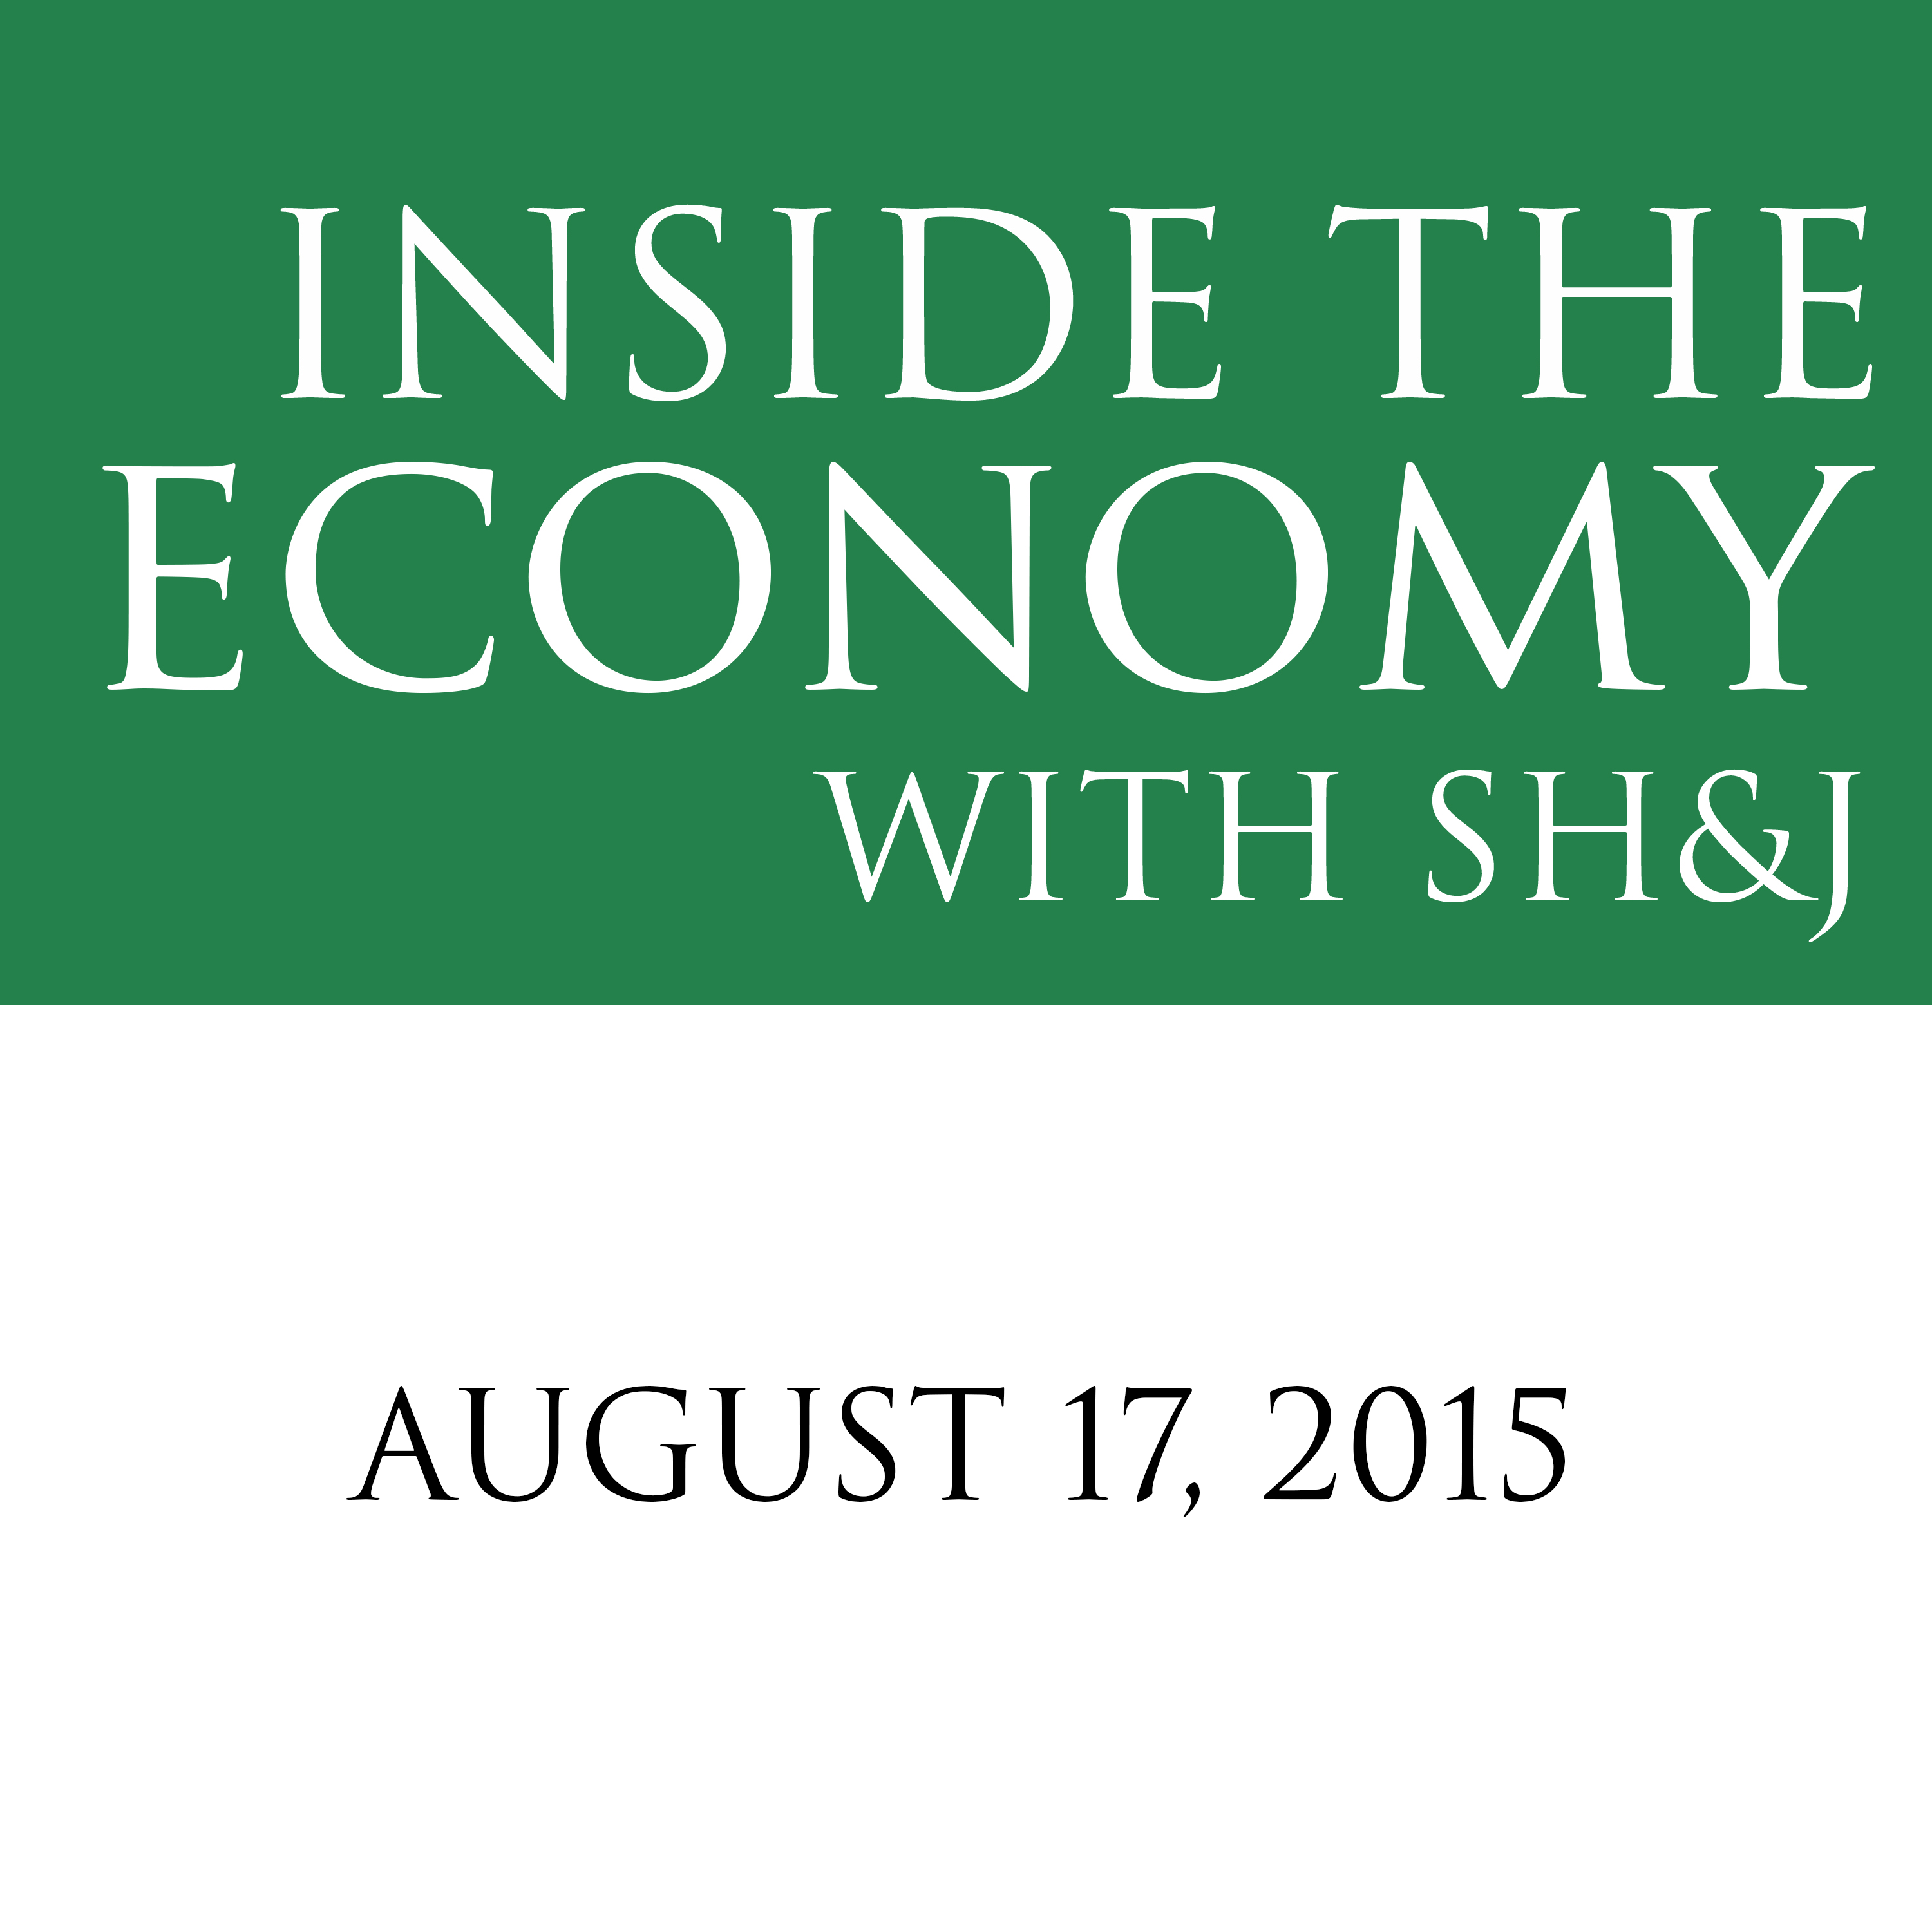 August 17, 2015 -- Inside the Economy with SH&J